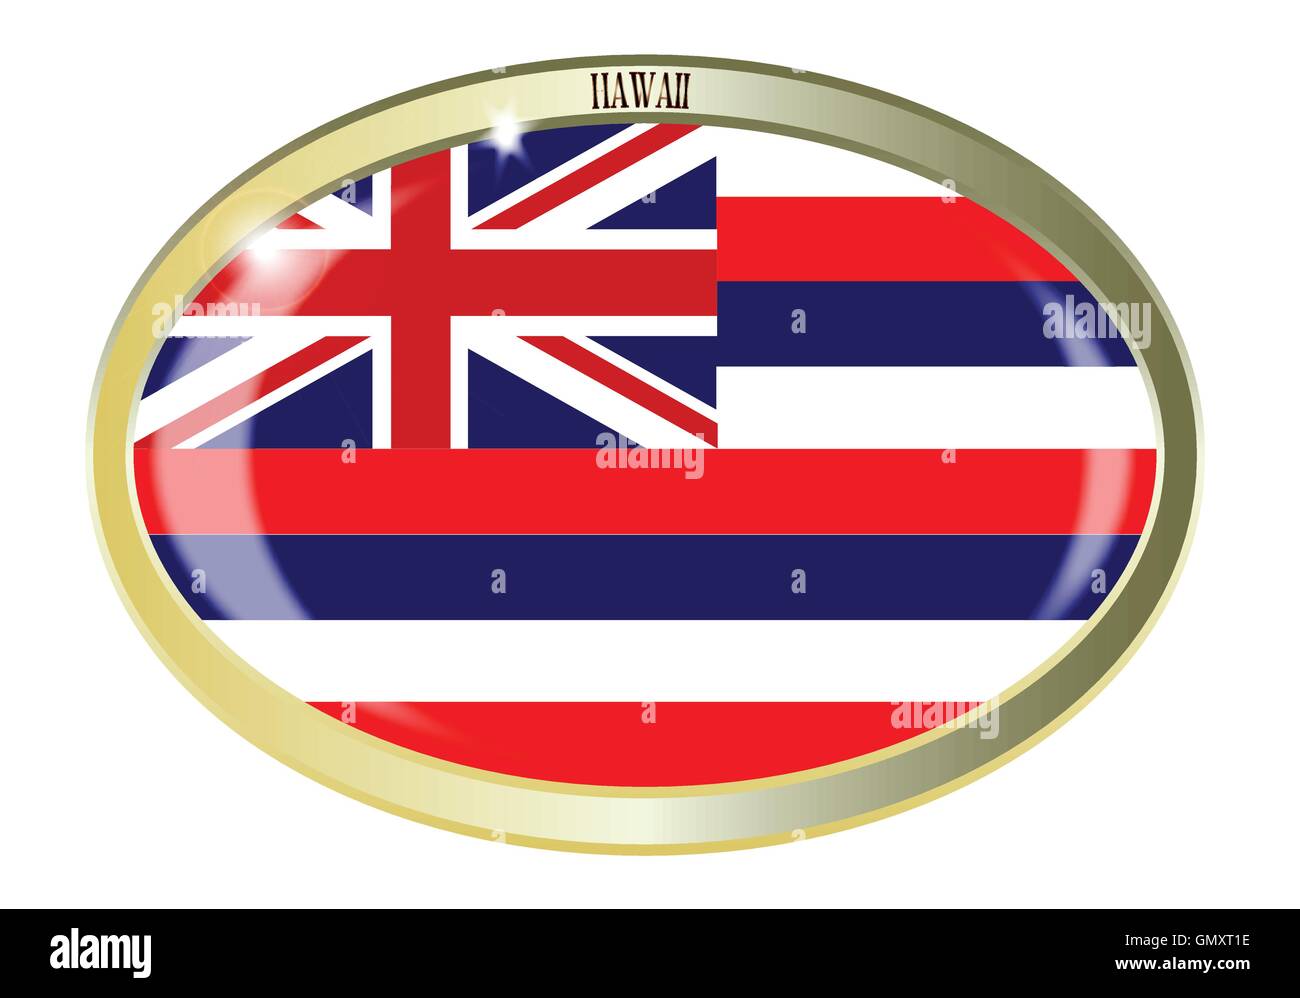 Hawaii State Flag Oval Button Stock Vector